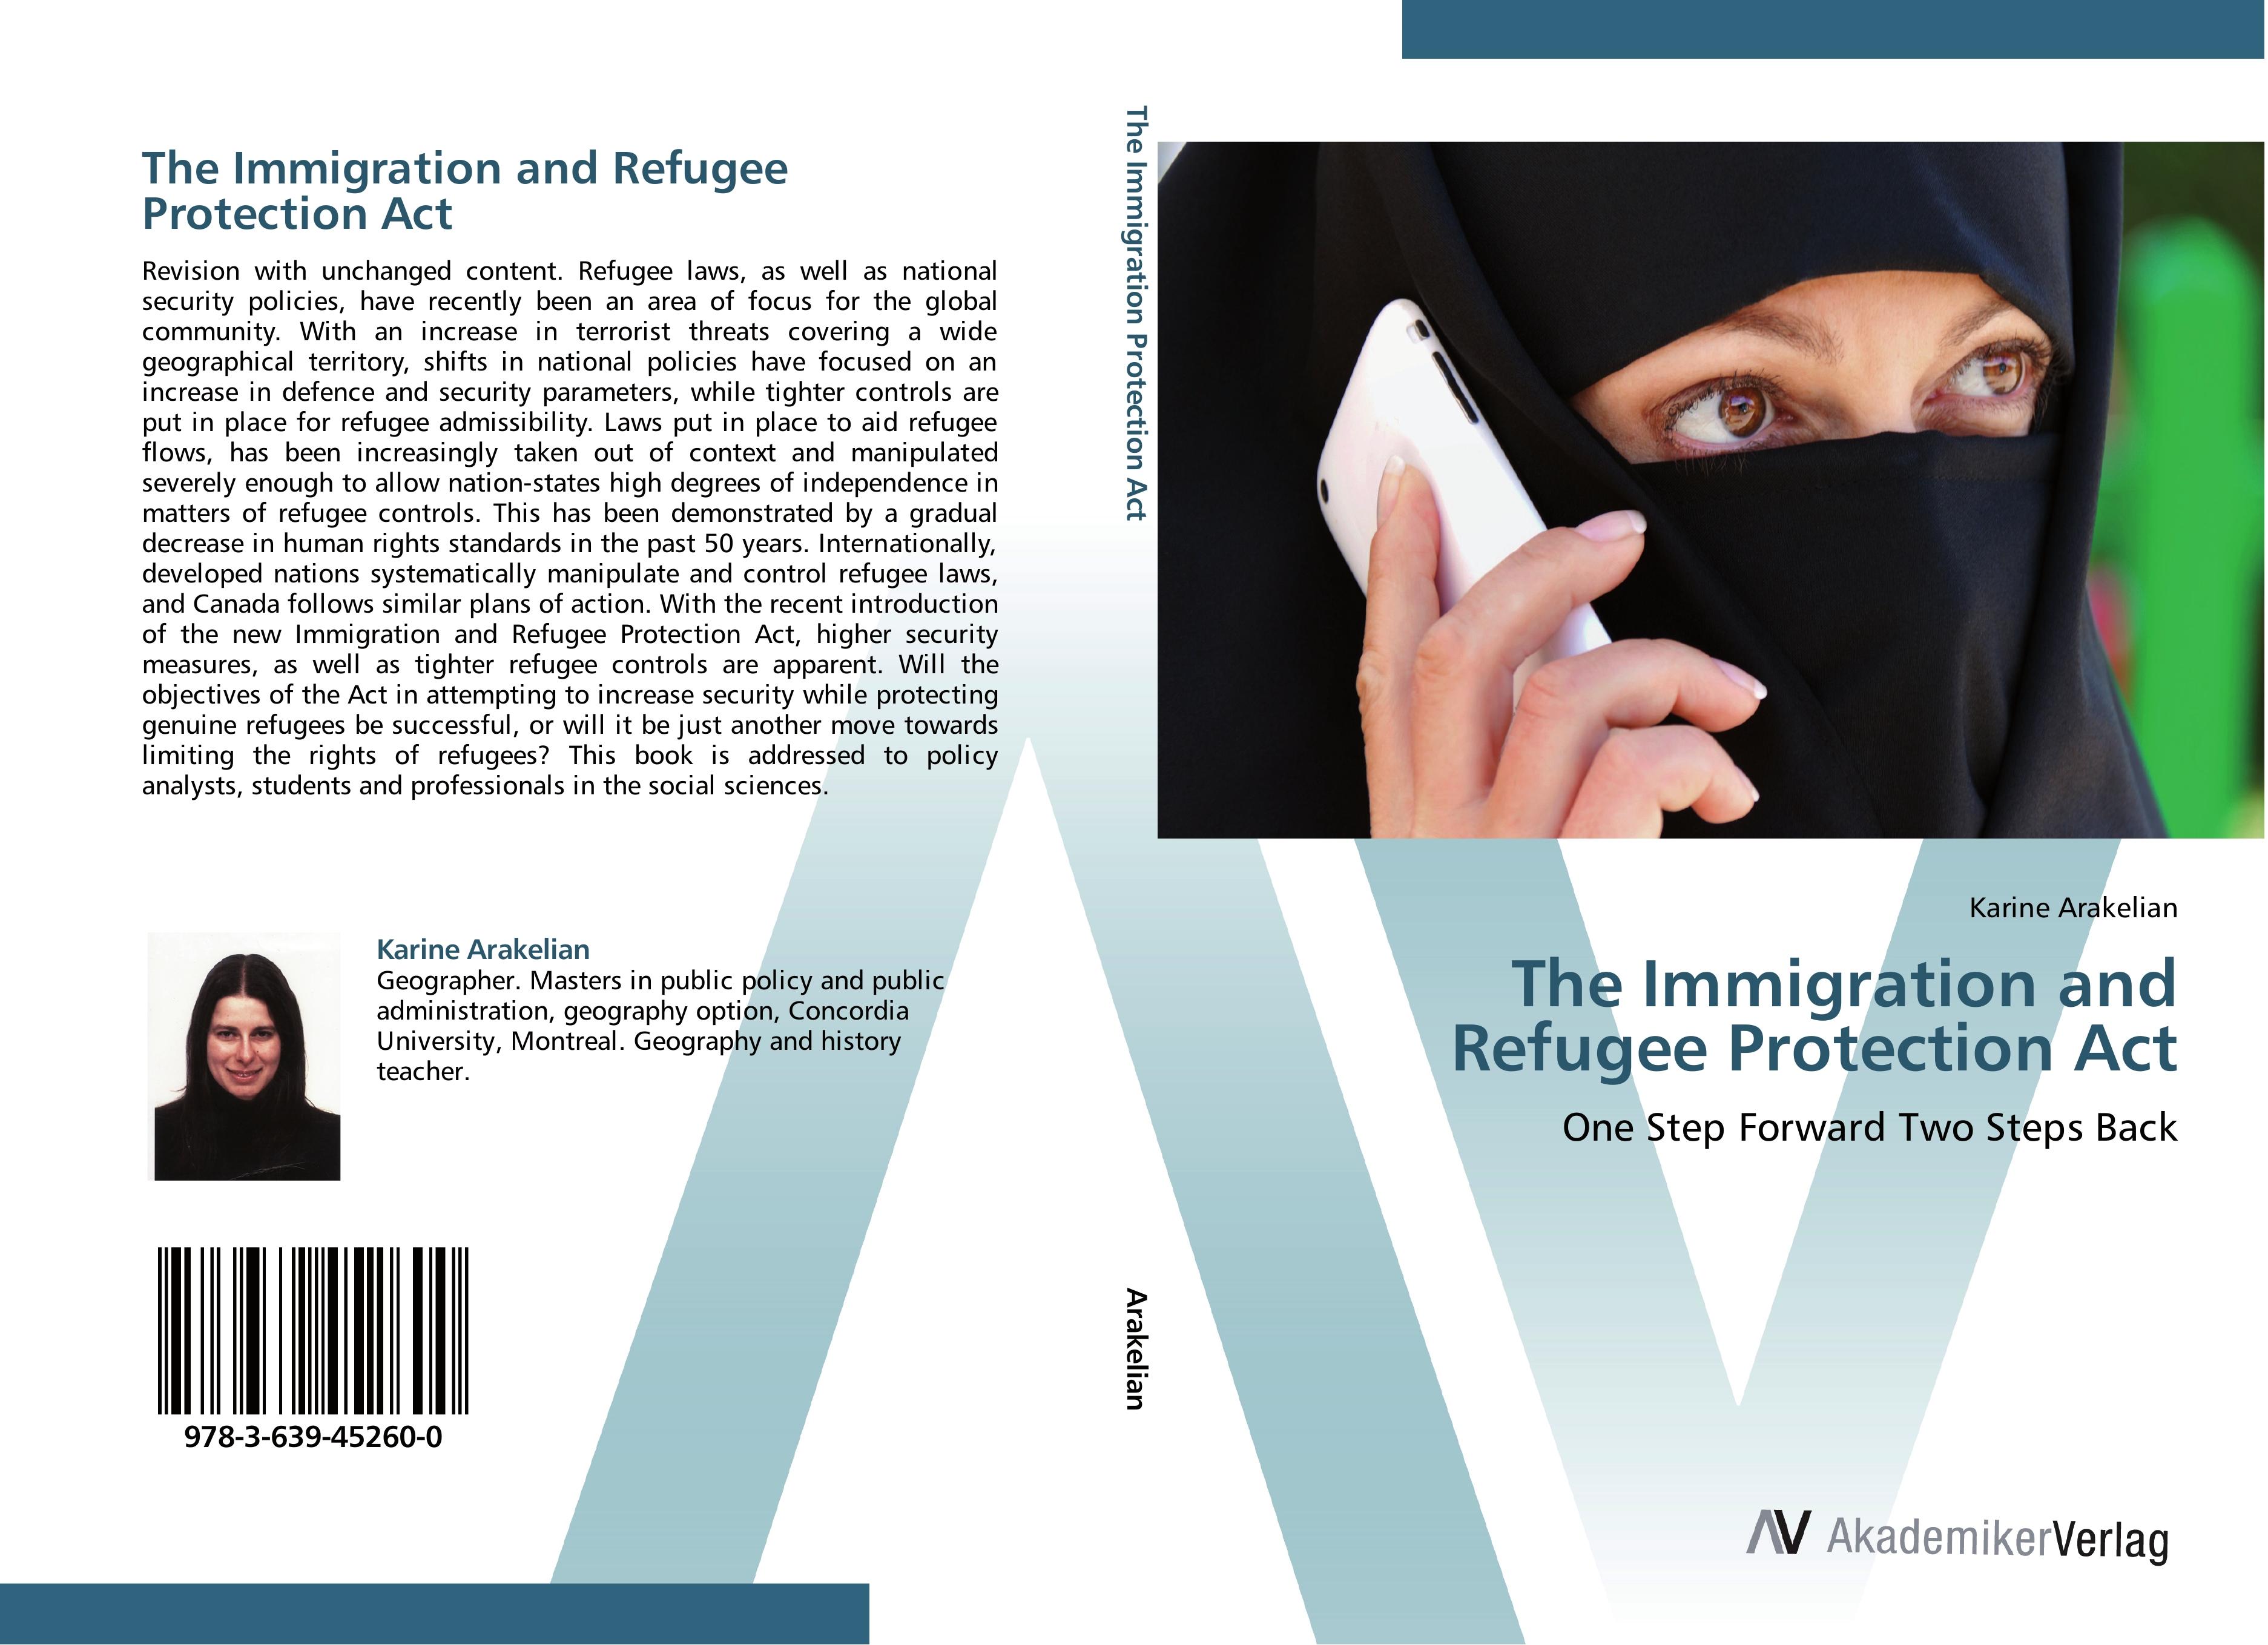 The Immigration and Refugee Protection Act - Arakelian, Karine